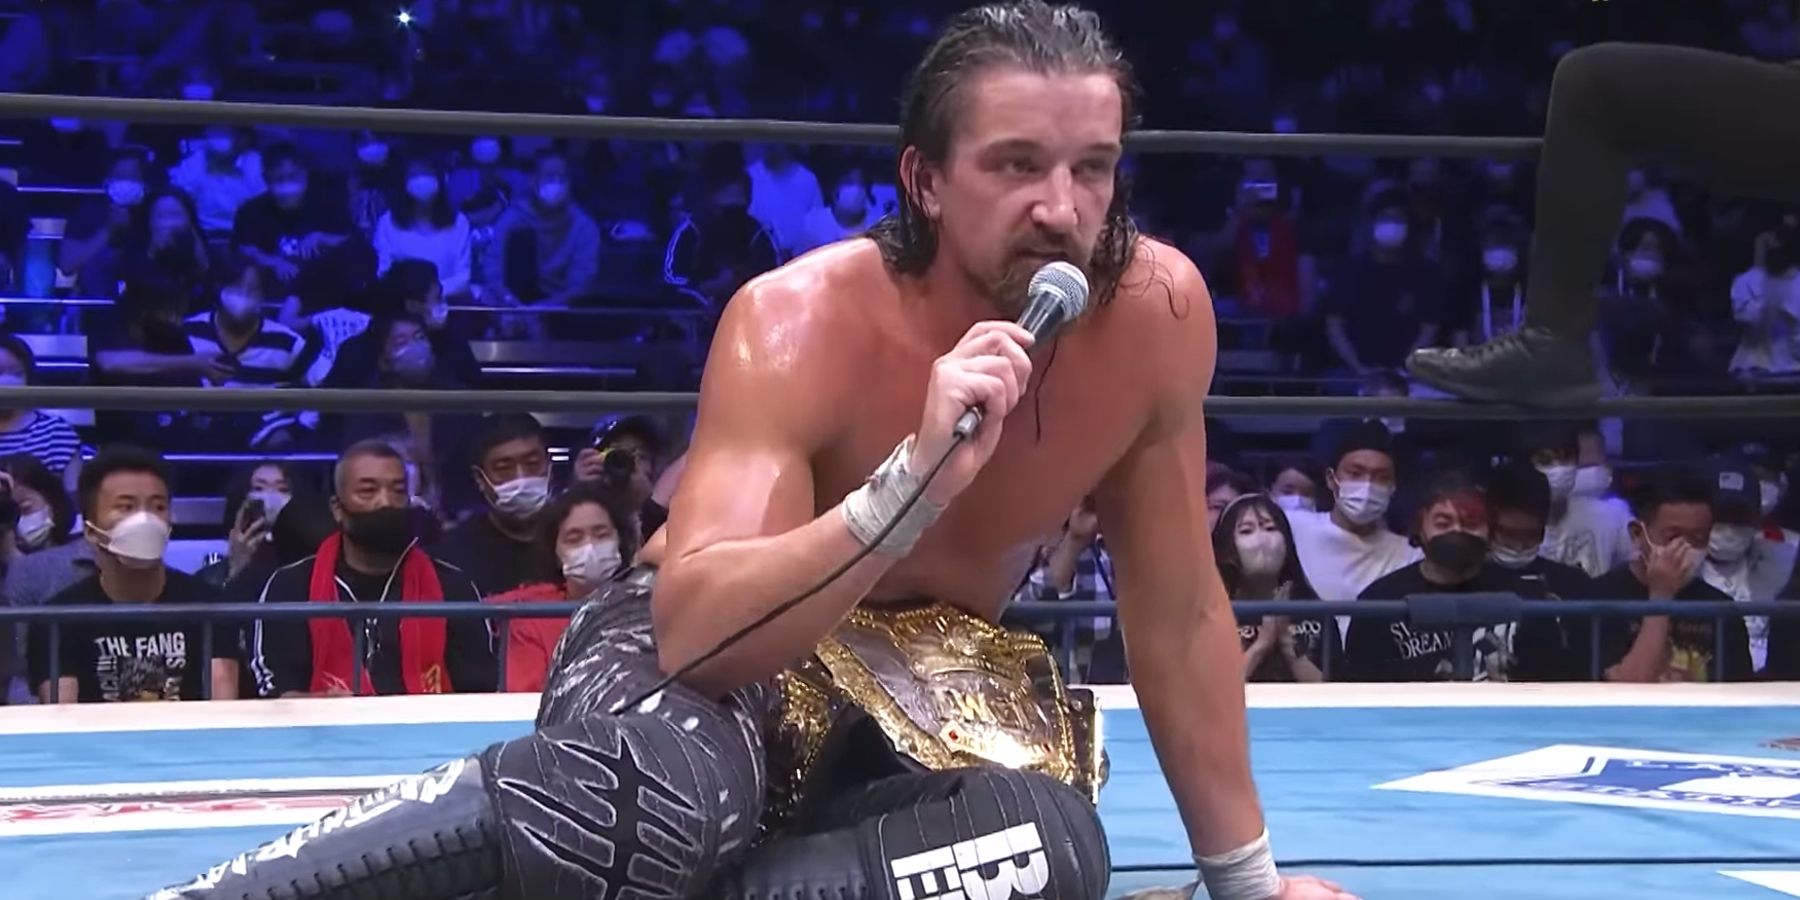 Jay White addresses NJPW fans after winning a match early in 2022.